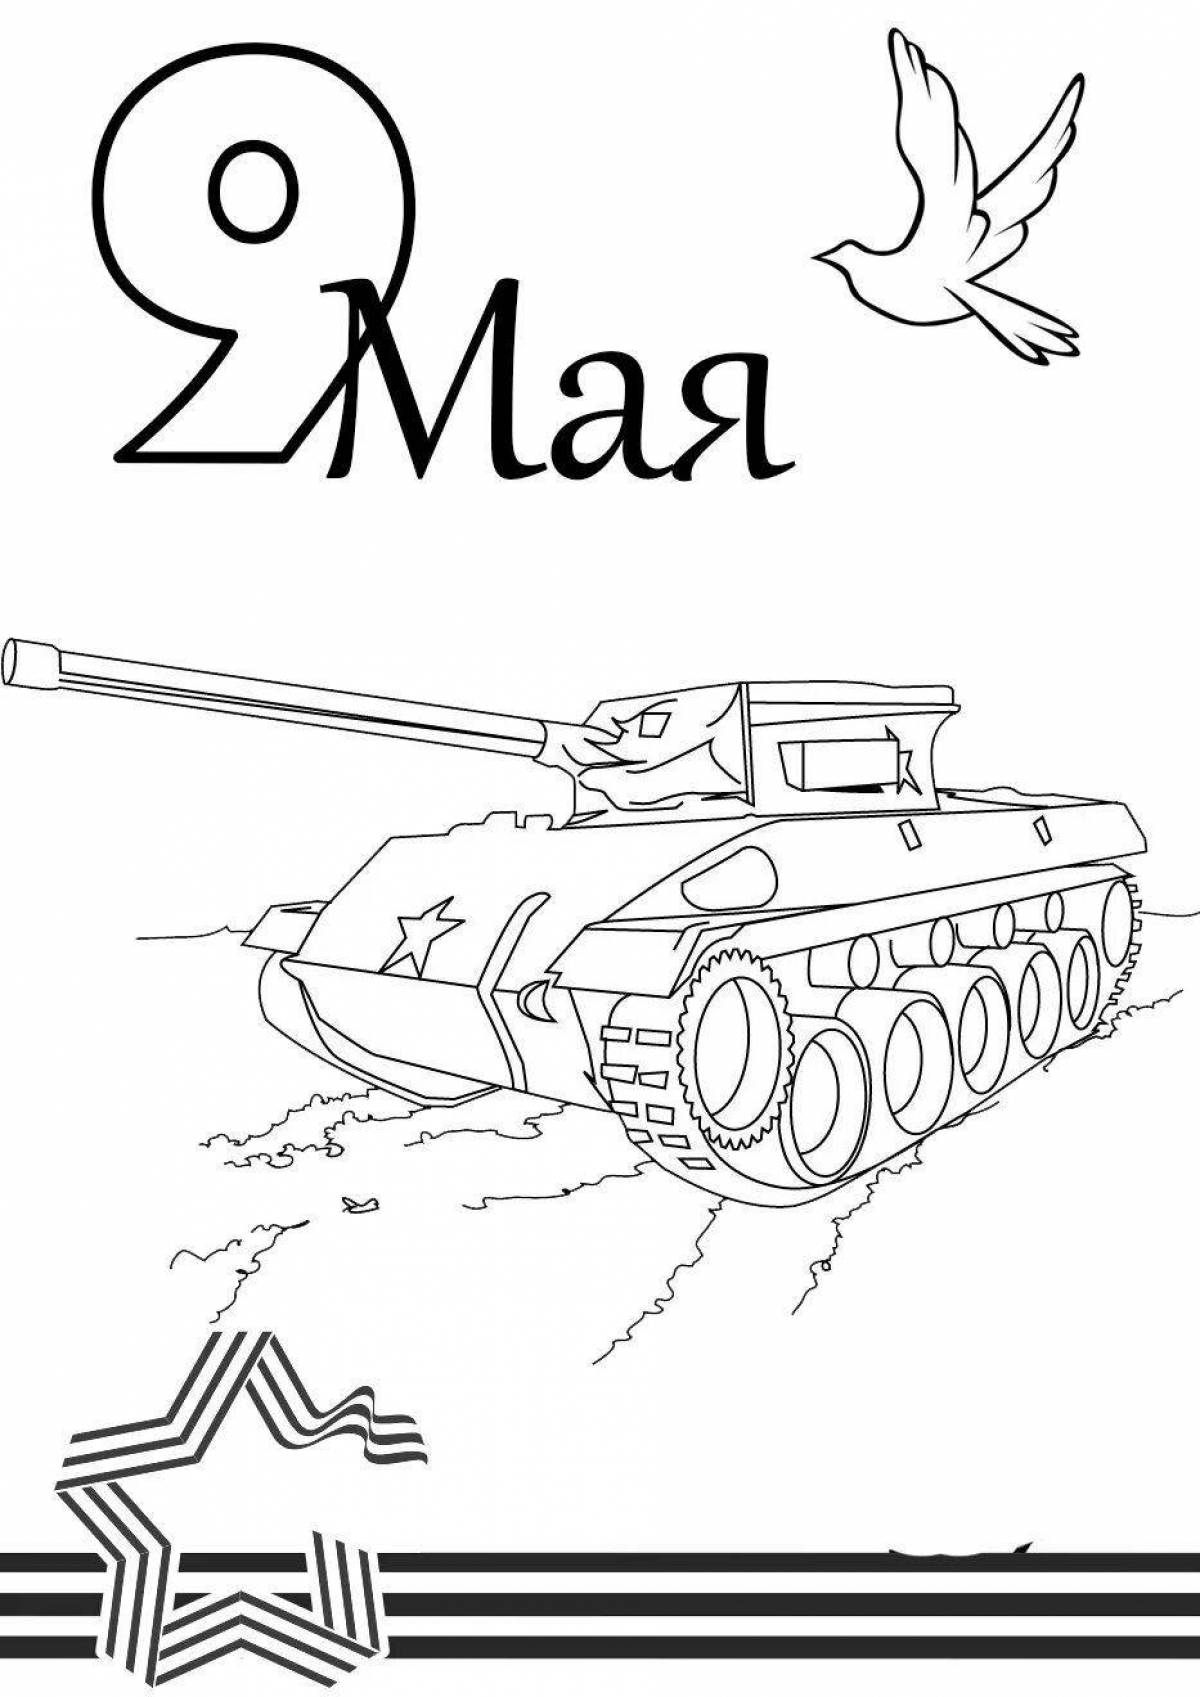 Colored funny Victory Day coloring book for kids